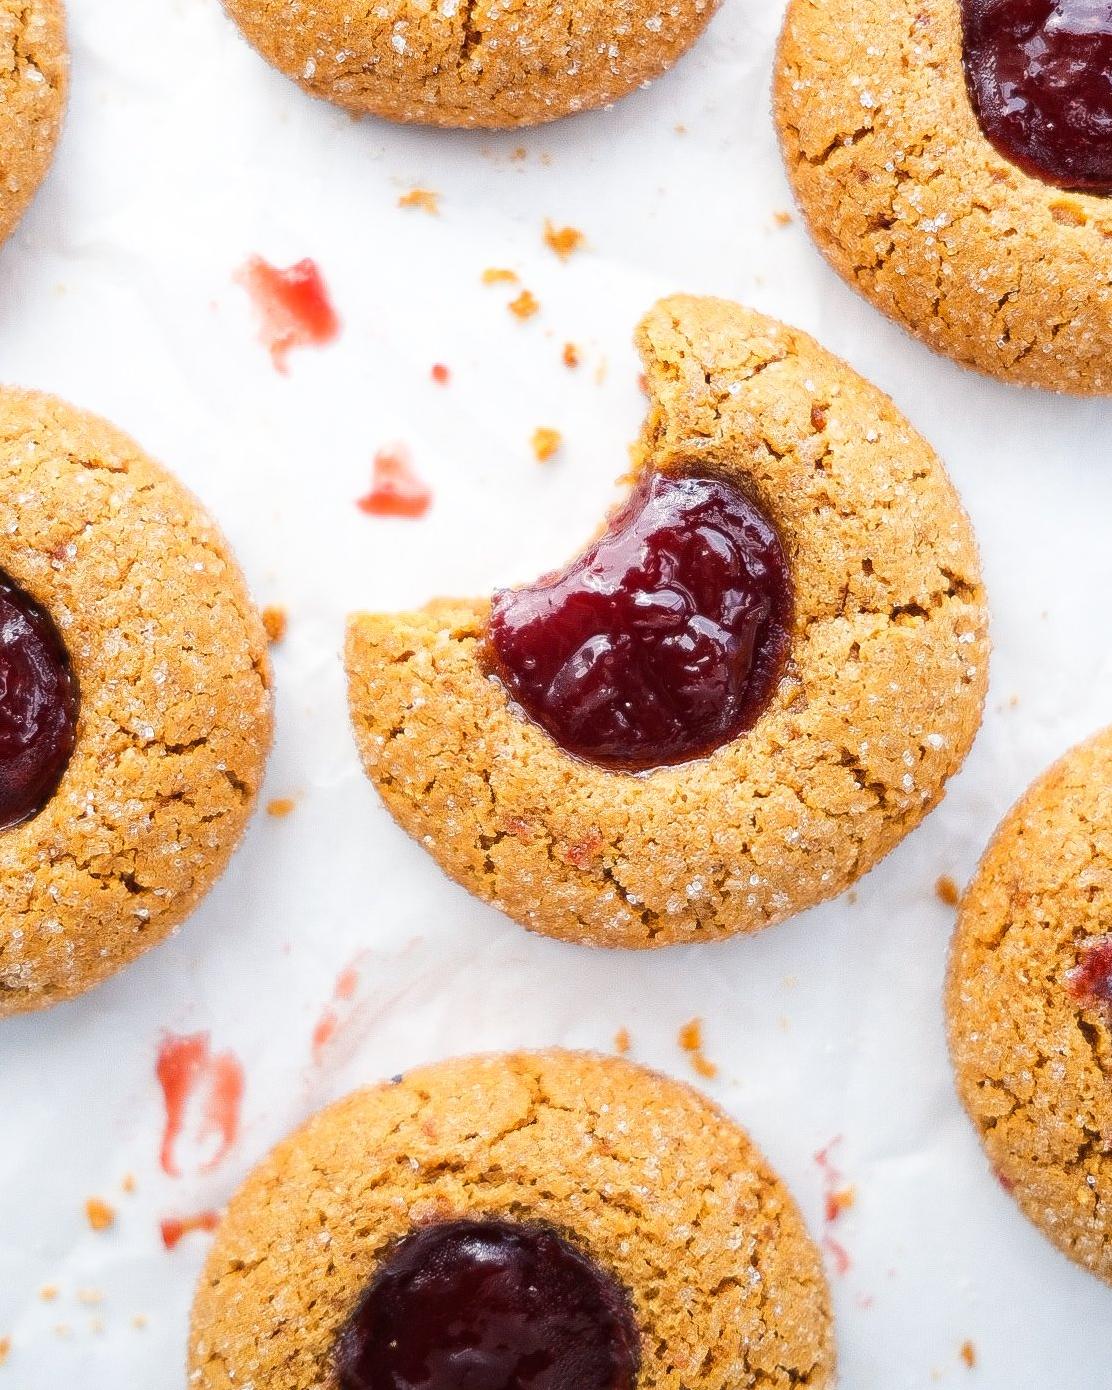  If you love Peanut Butter and Jelly sandwiches, you'll definitely love these cookies!